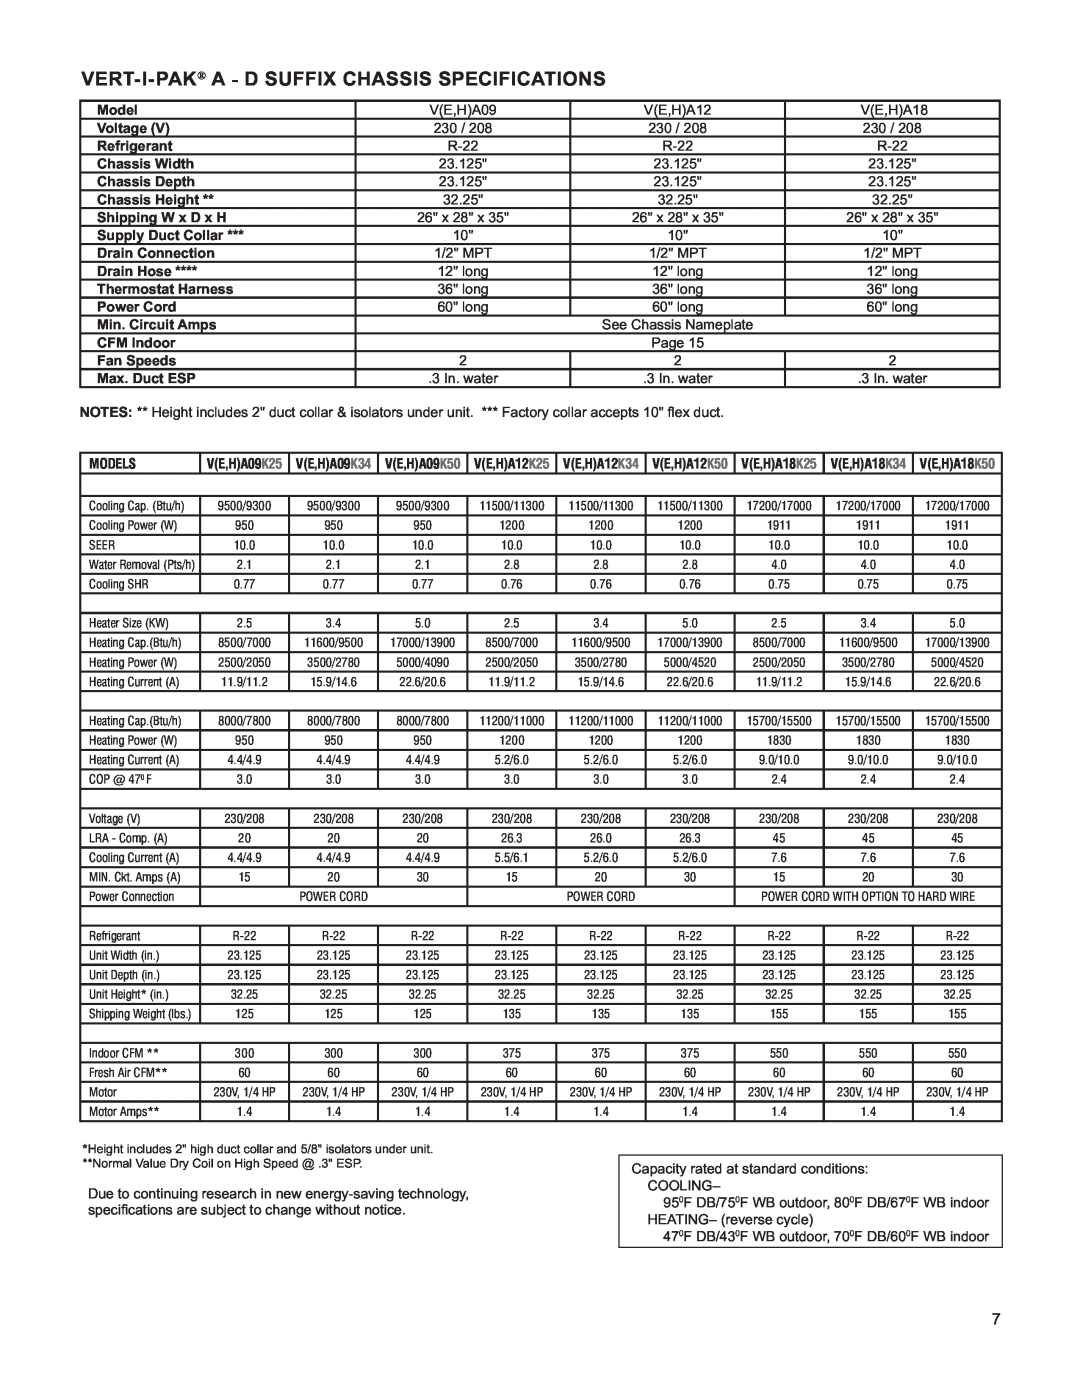 Friedrich V(E, H)A09K25 service manual Vert-I-Pak A - D Suffix Chassis Specifications 